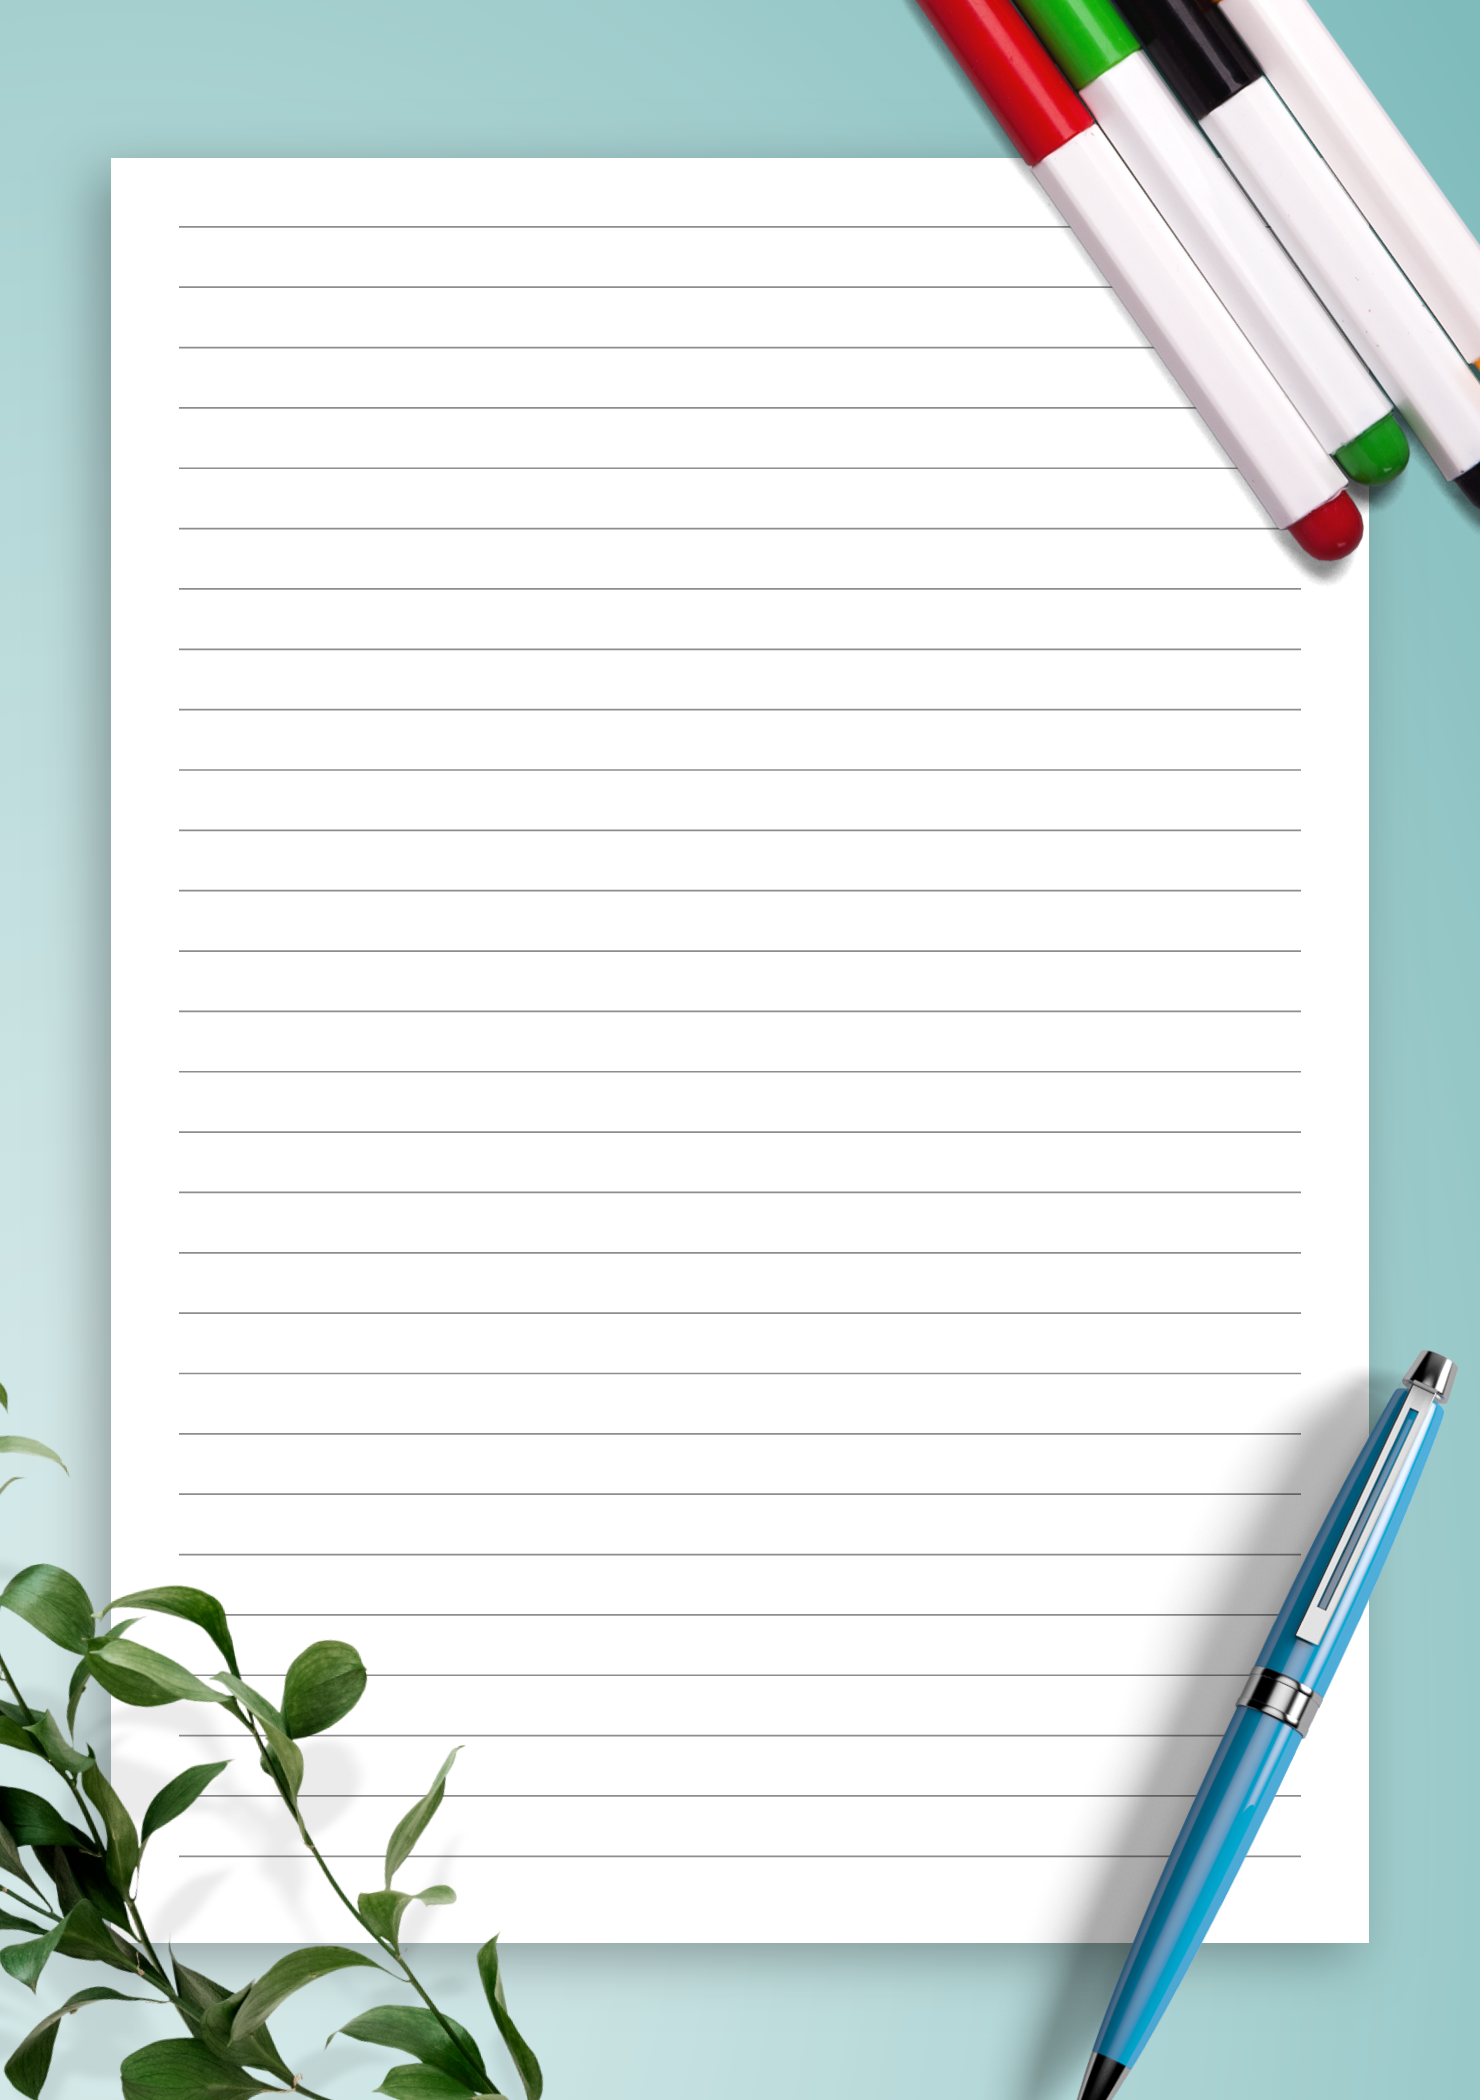 Printable Lined Paper With Designs